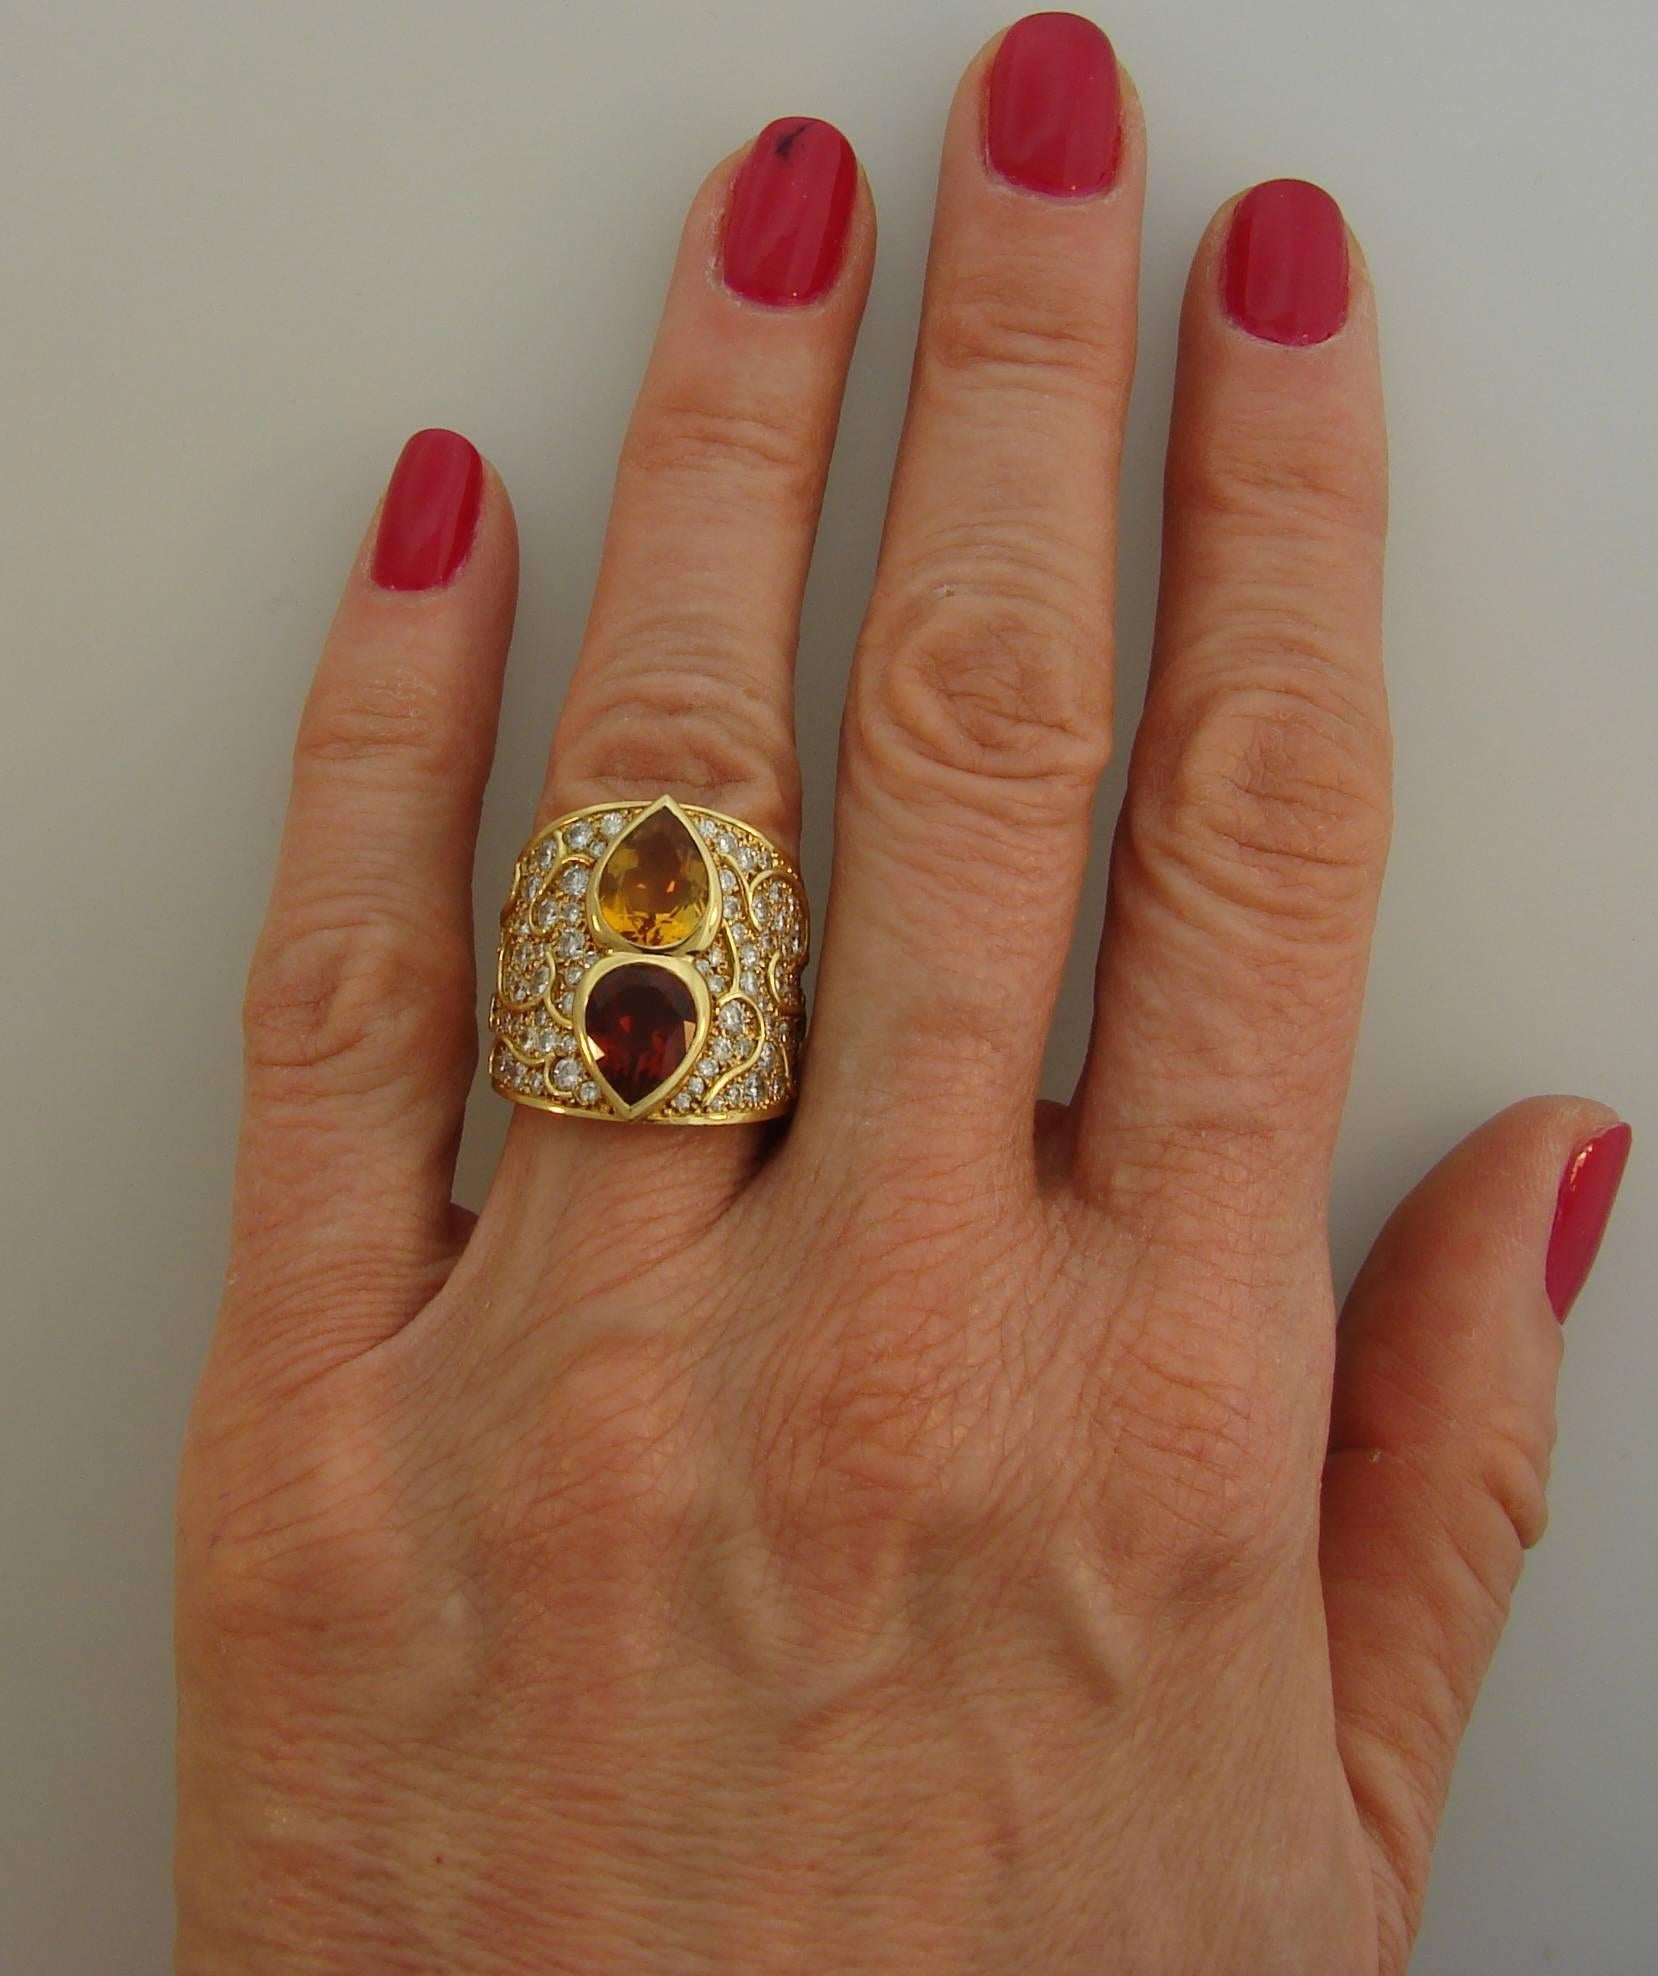 Colorful and chic cocktail ring created by Marina B in France in 1985. Made of 18 karat yellow gold, the ring features a pear-shape topaz and citrine accented with a hundred and two round brilliant cut diamonds (G color, VS1 clarity, total weight